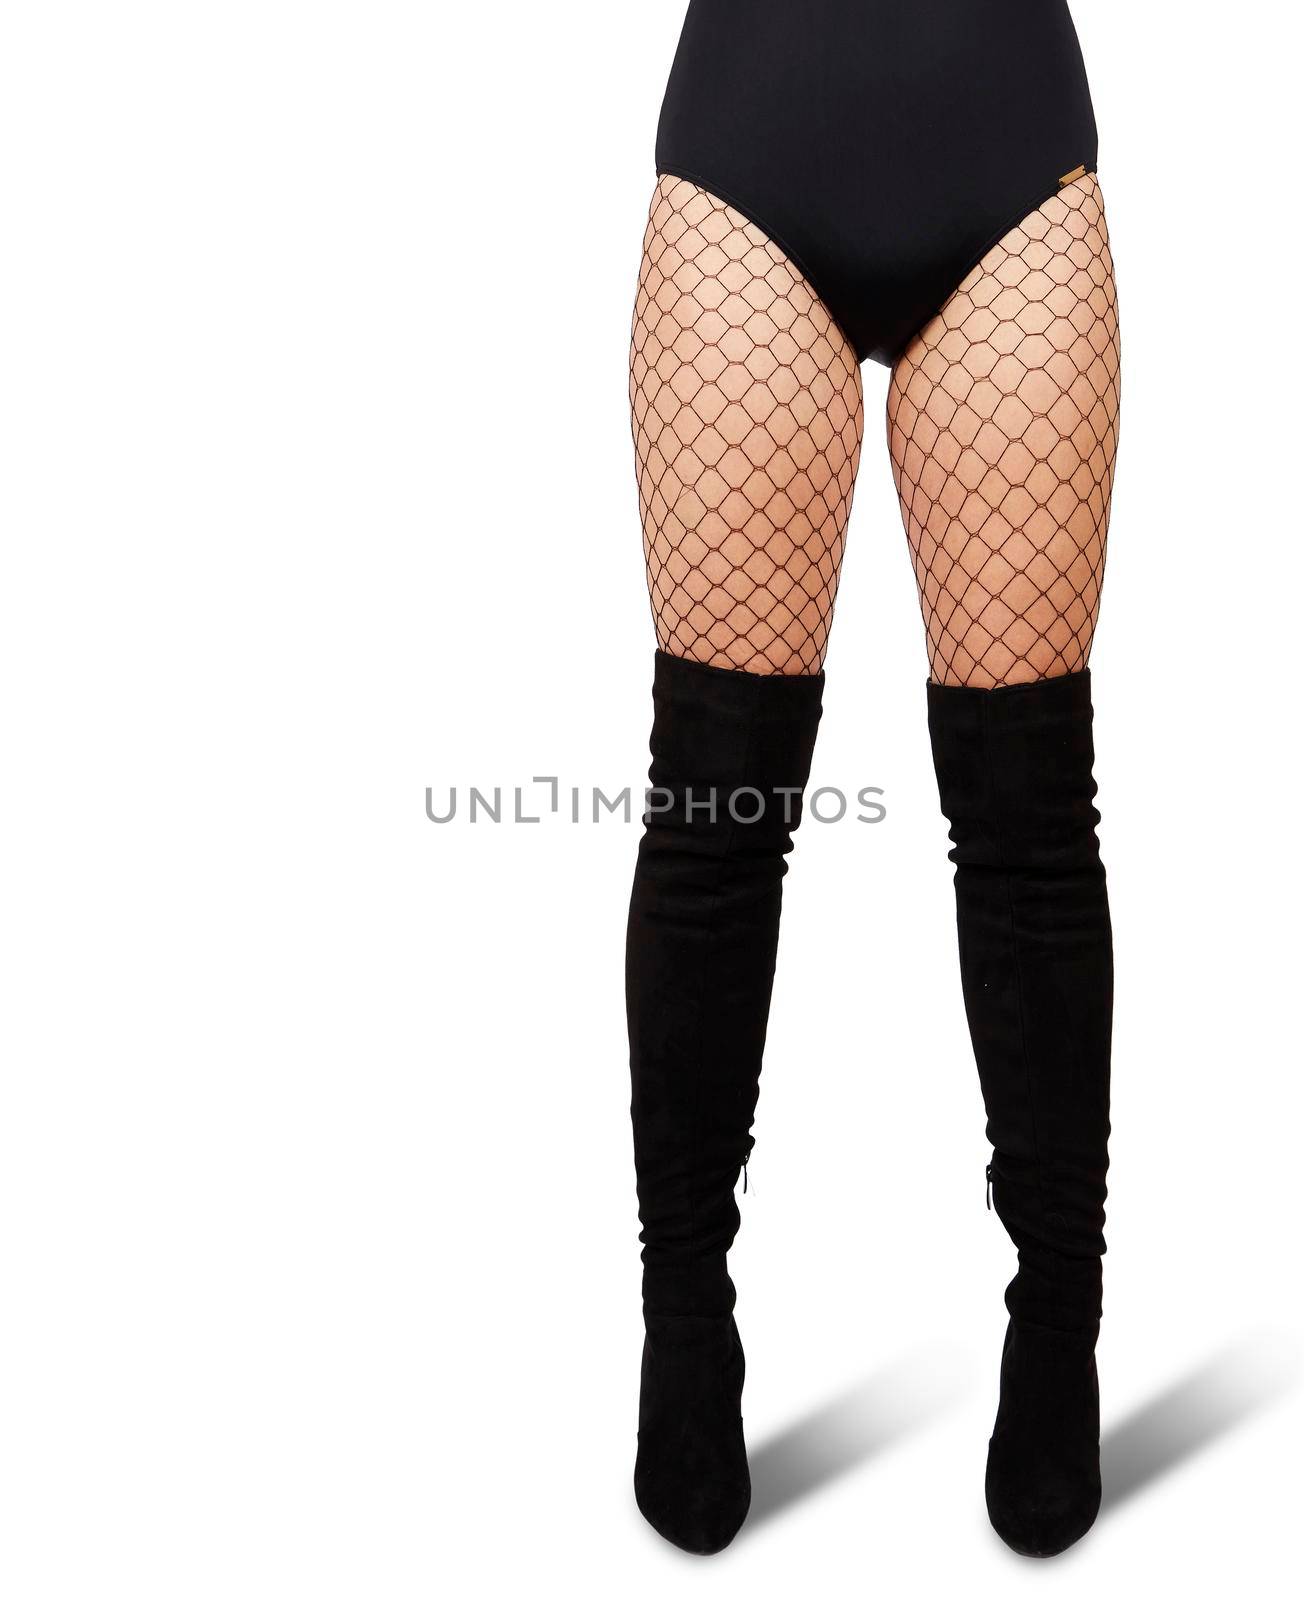 slender female legs in mesh tights and black boots on white background